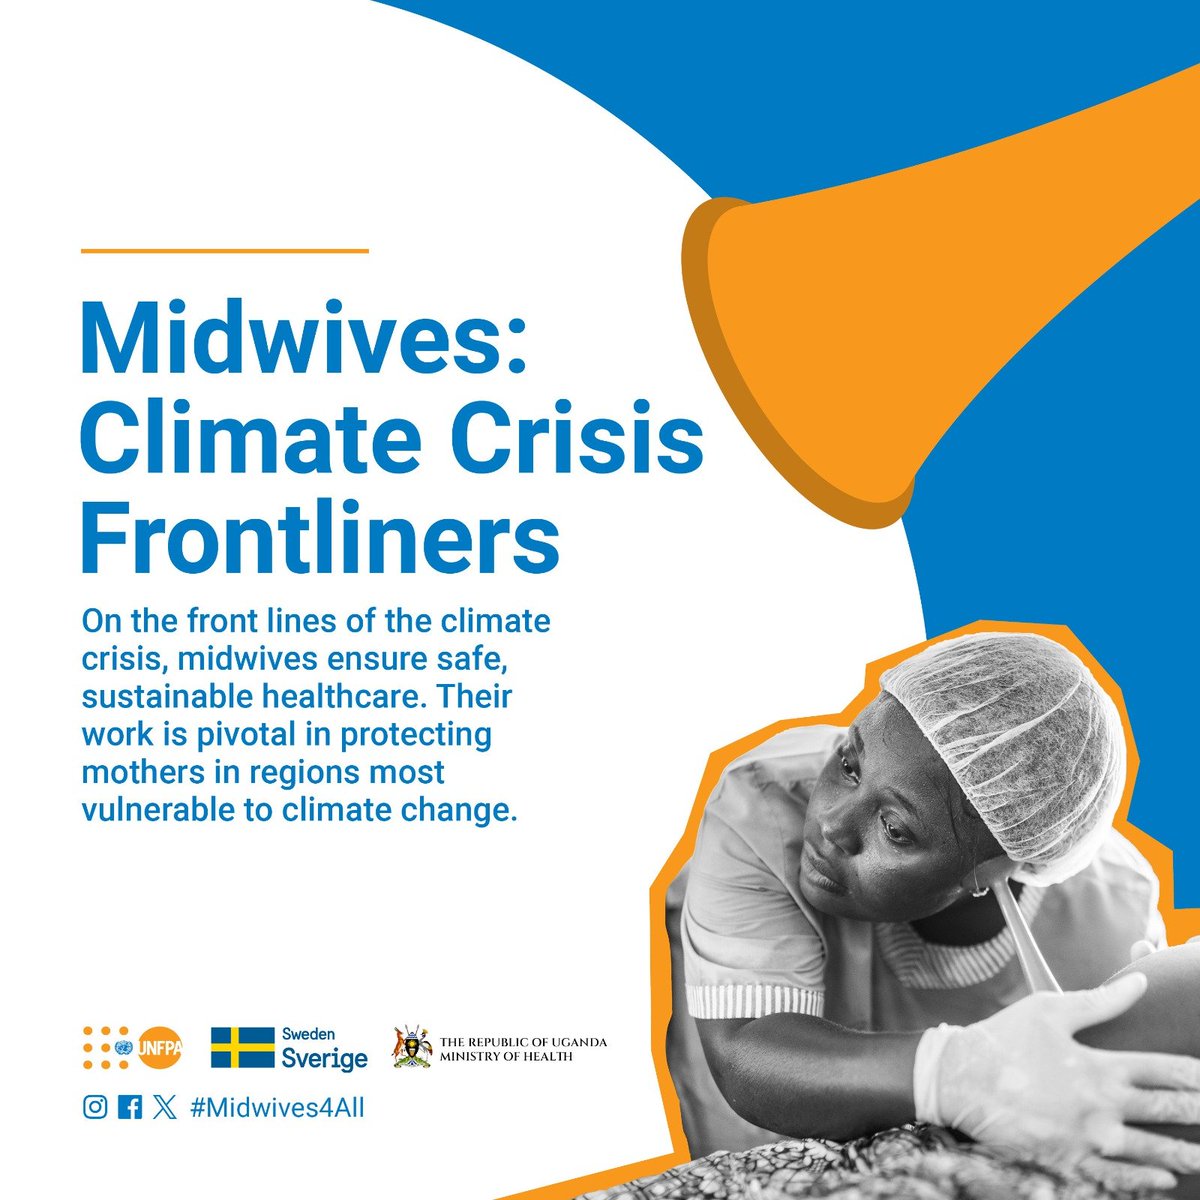 Midwife & Climate Change? How? 
Pause for thought. 
That was me. 
But when you really think about it, when you start putting pieces together, you see how midwives enable sustainable healthcare. #Midwives4All

How can we magnify their impact on climate action?